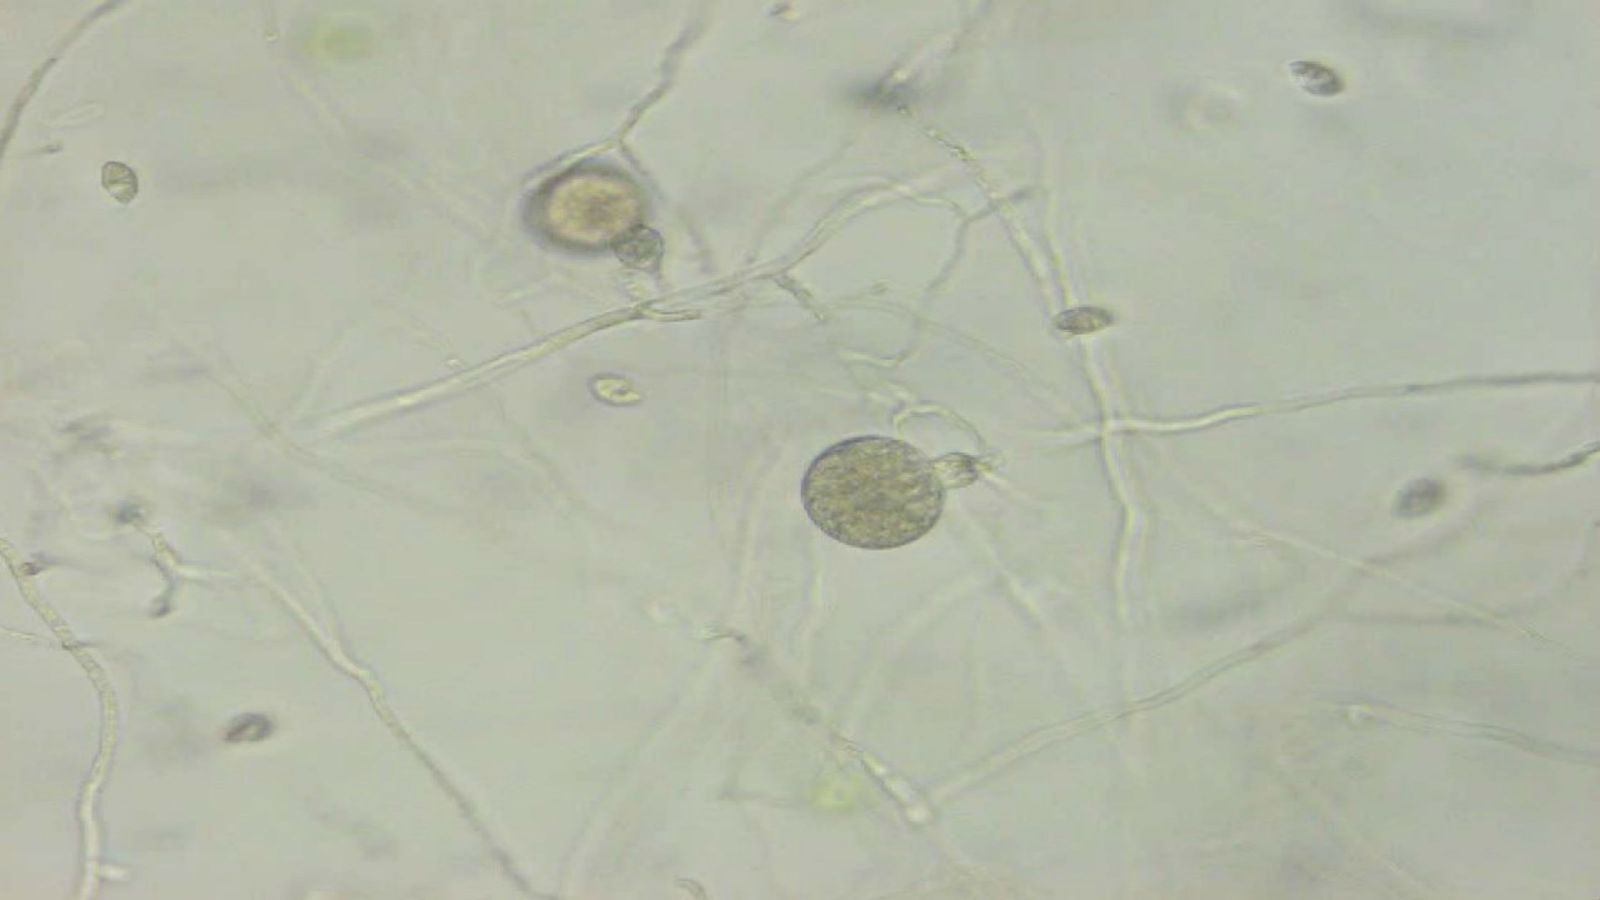 When viewed under a microscope, the complex life cycle of the pathogen becomes clear. The round structure is an oospore, which can lie dormant in the soil for years before reactivating. The small lens-shaped cells are zoospores, which swim around searching for a new tree root to infect. When they find one, they germinate and initiate an infection. The string-like fibres are mycelia, which are the actively growing structures inside an infected tree.